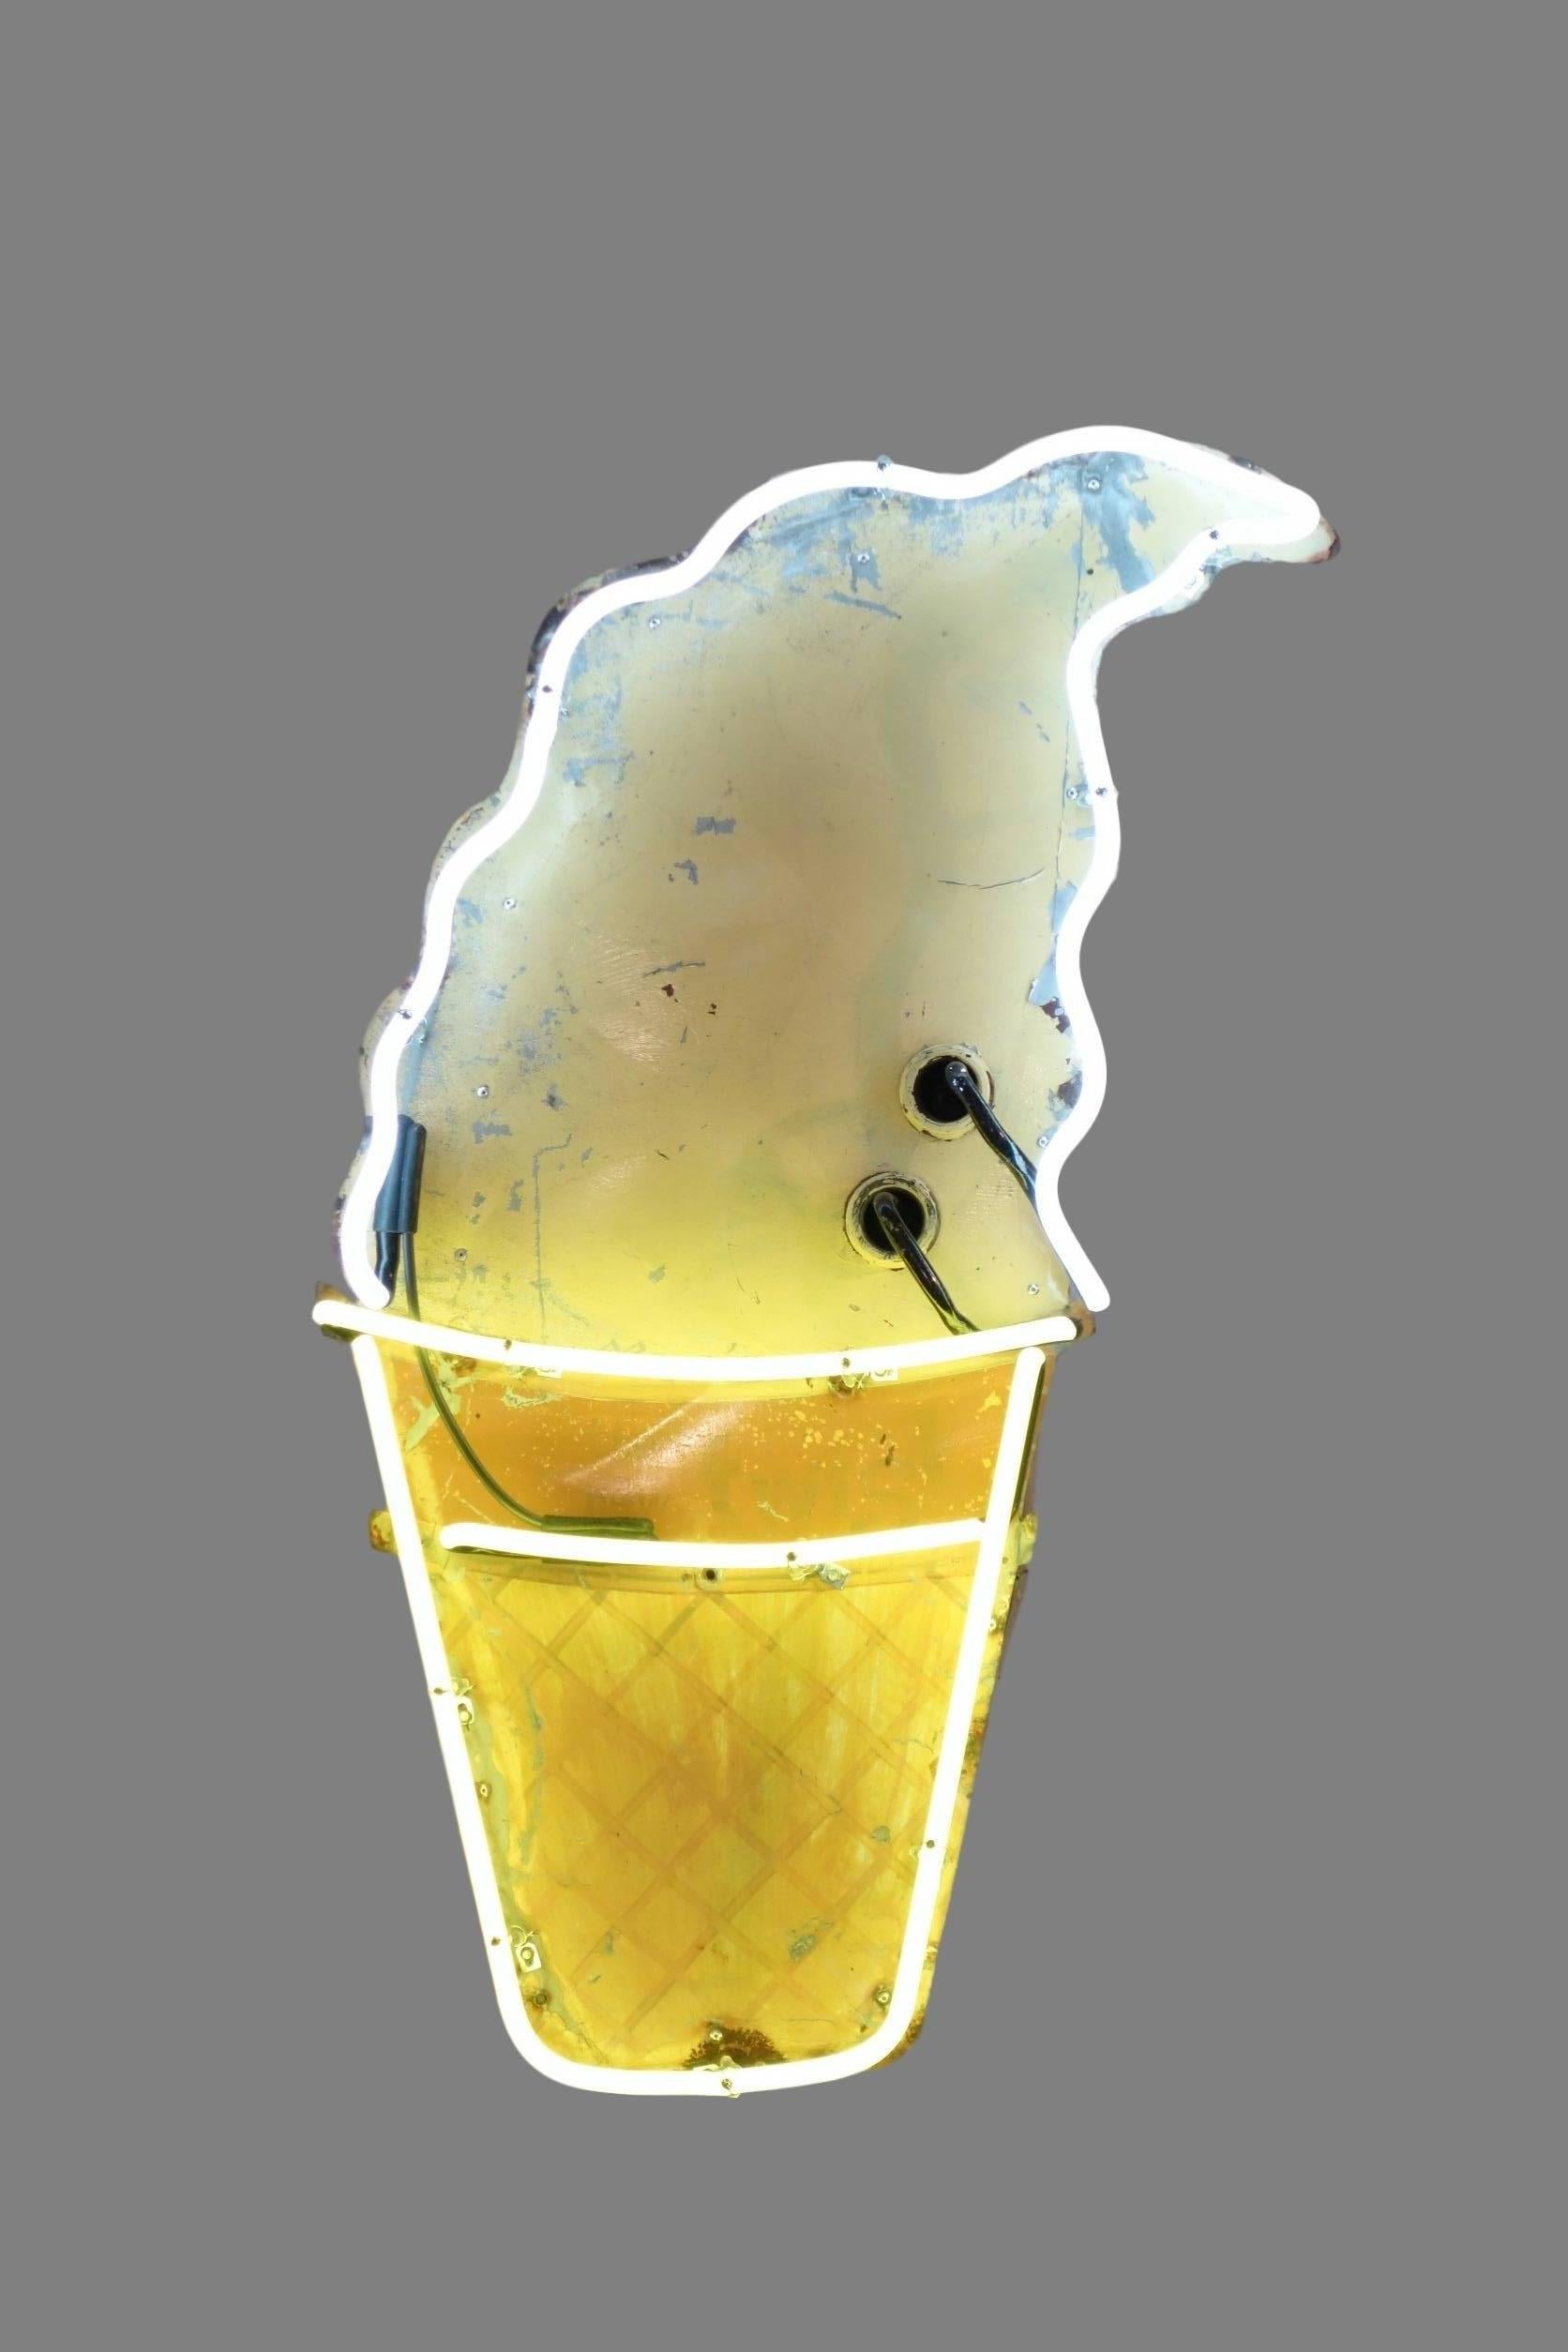 This is a hand-painted neon ice cream cone sign.